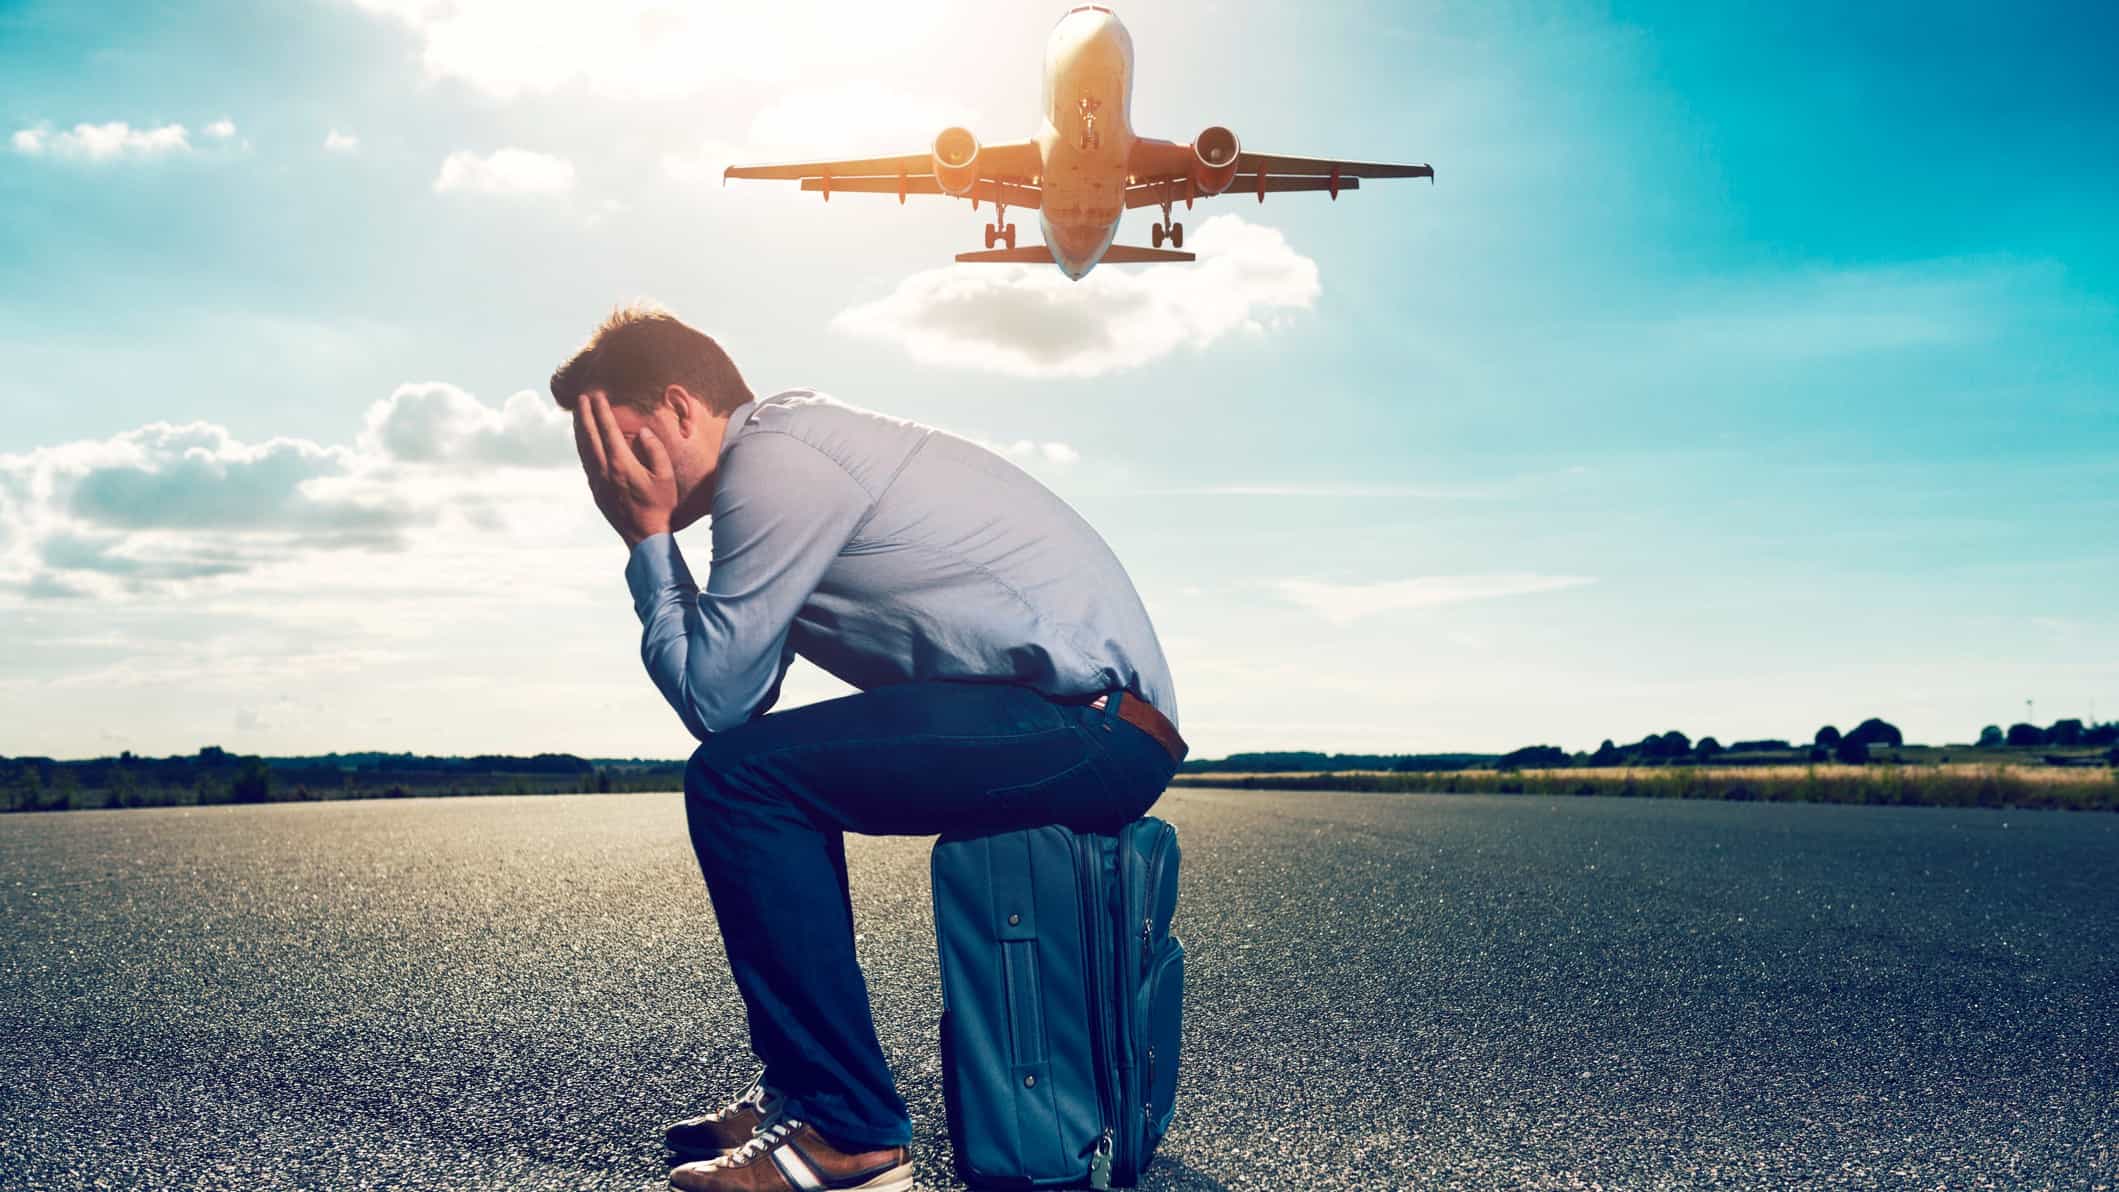 ASX 200 travel shares A man sits on a suitcase with his head in his hands as a plane flies overhead